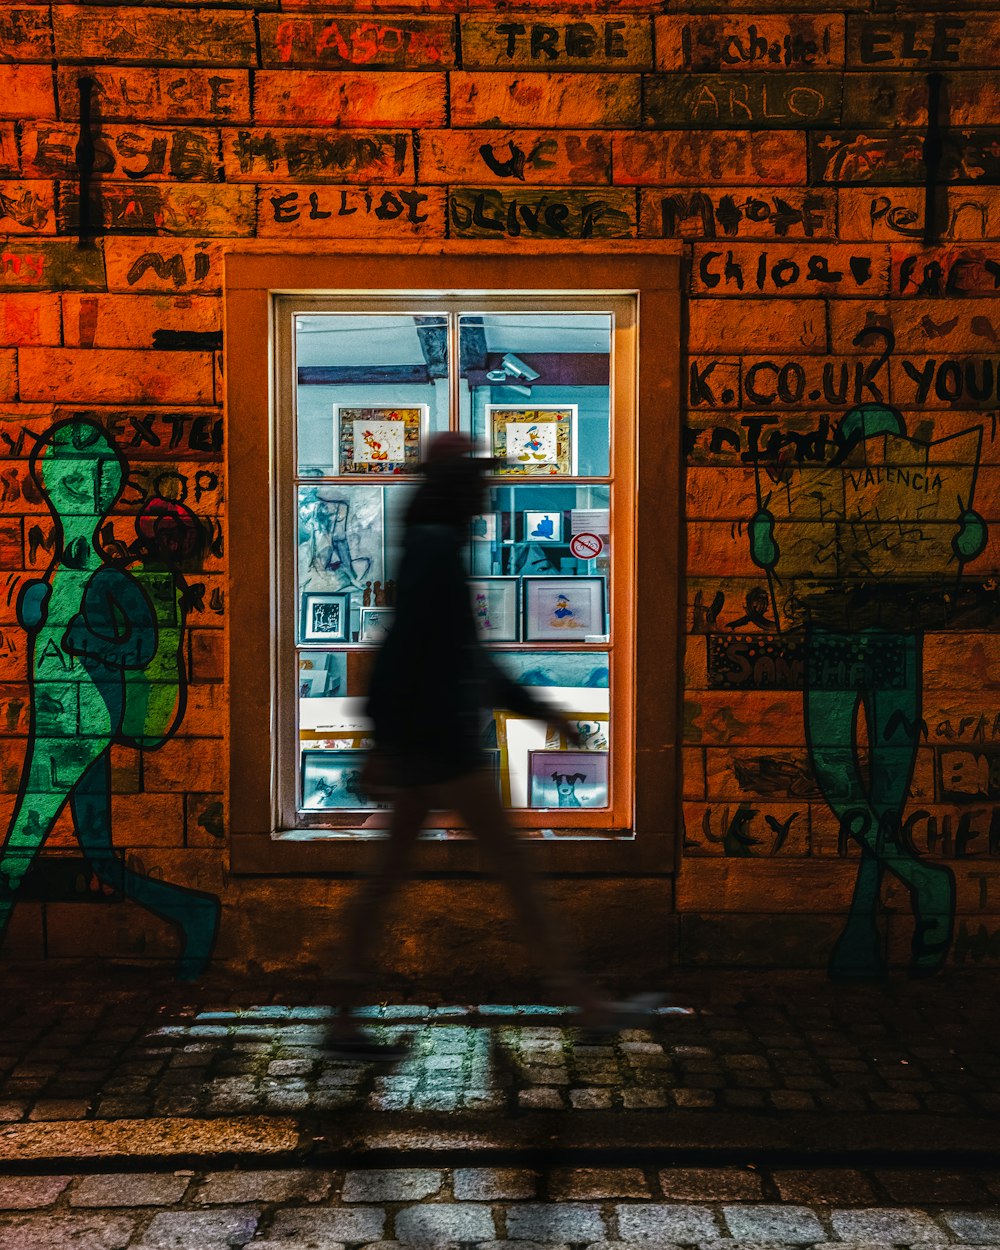 a person walking past a window with graffiti on it